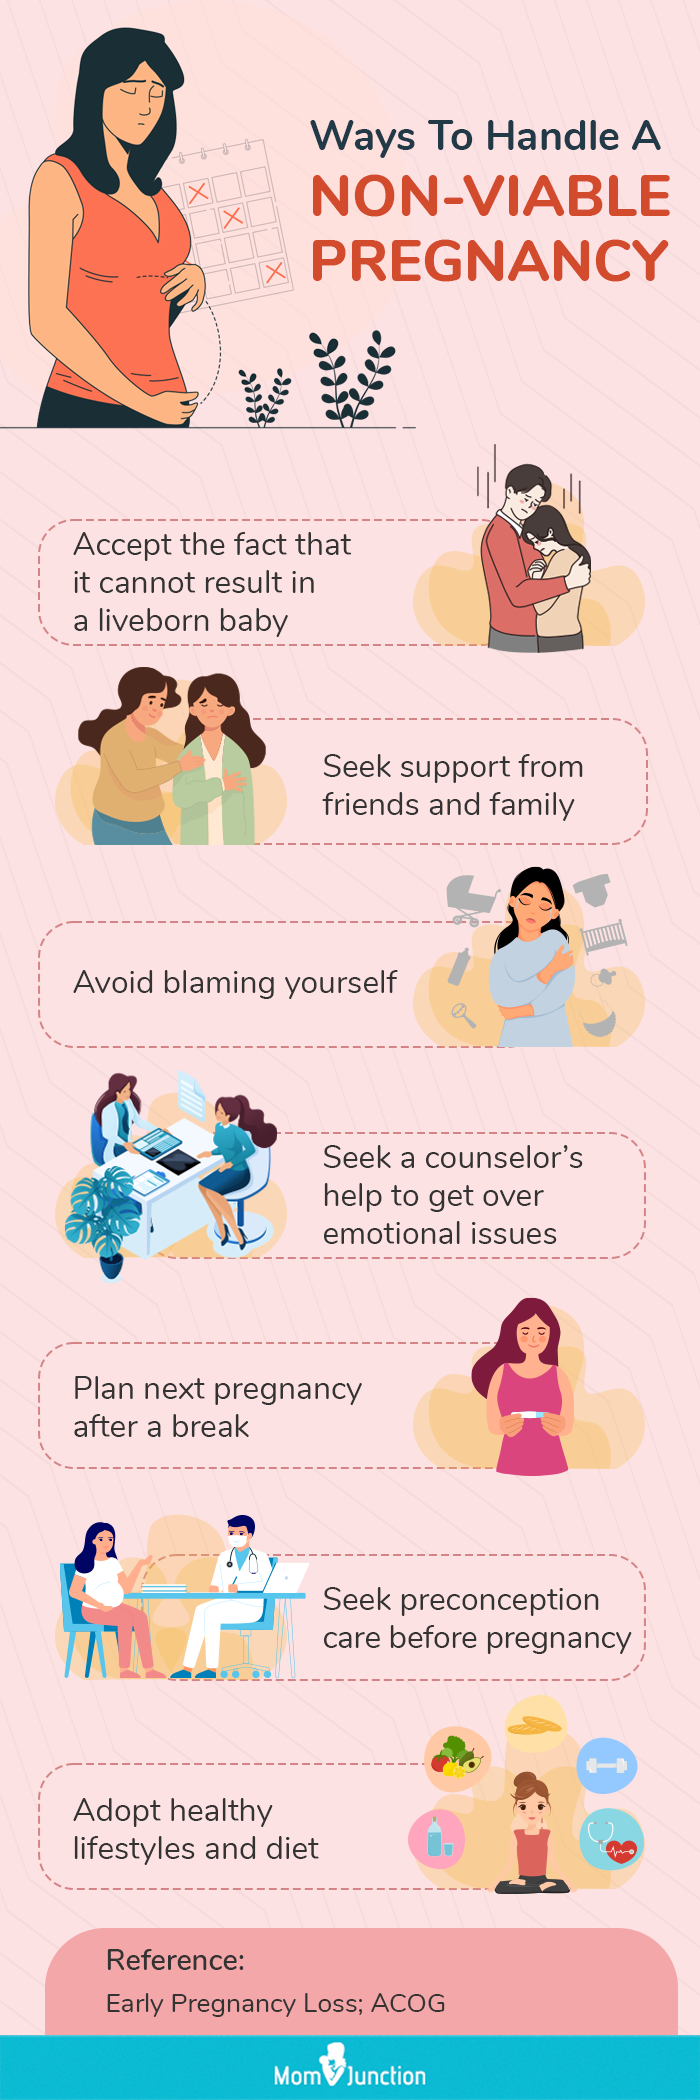 ways to handle a non viable pregnancy [infographic]